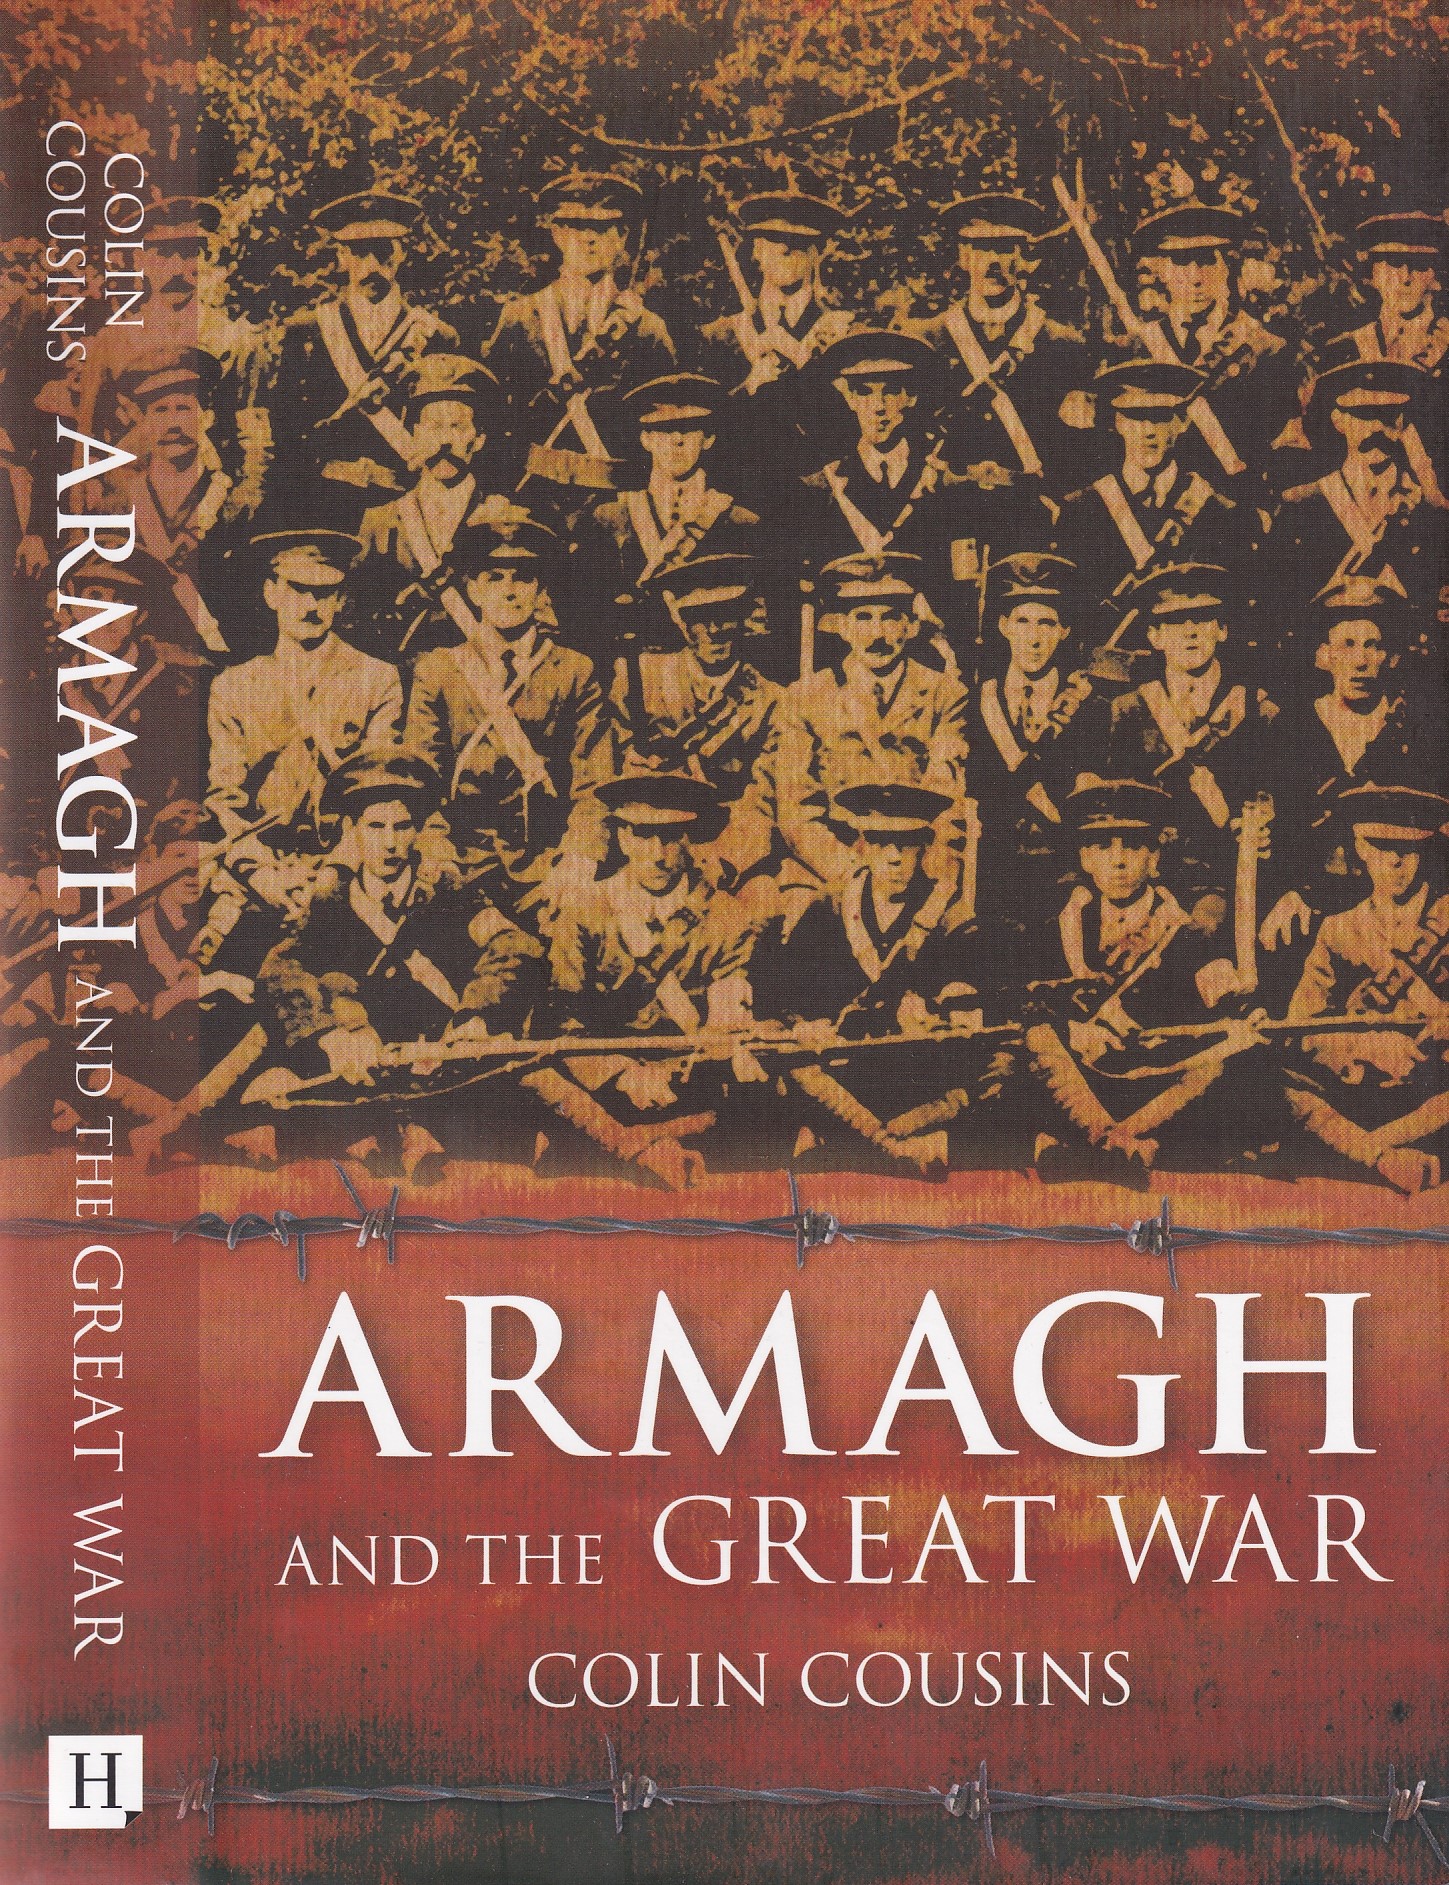 Armagh and the Great War by Colin Cousins